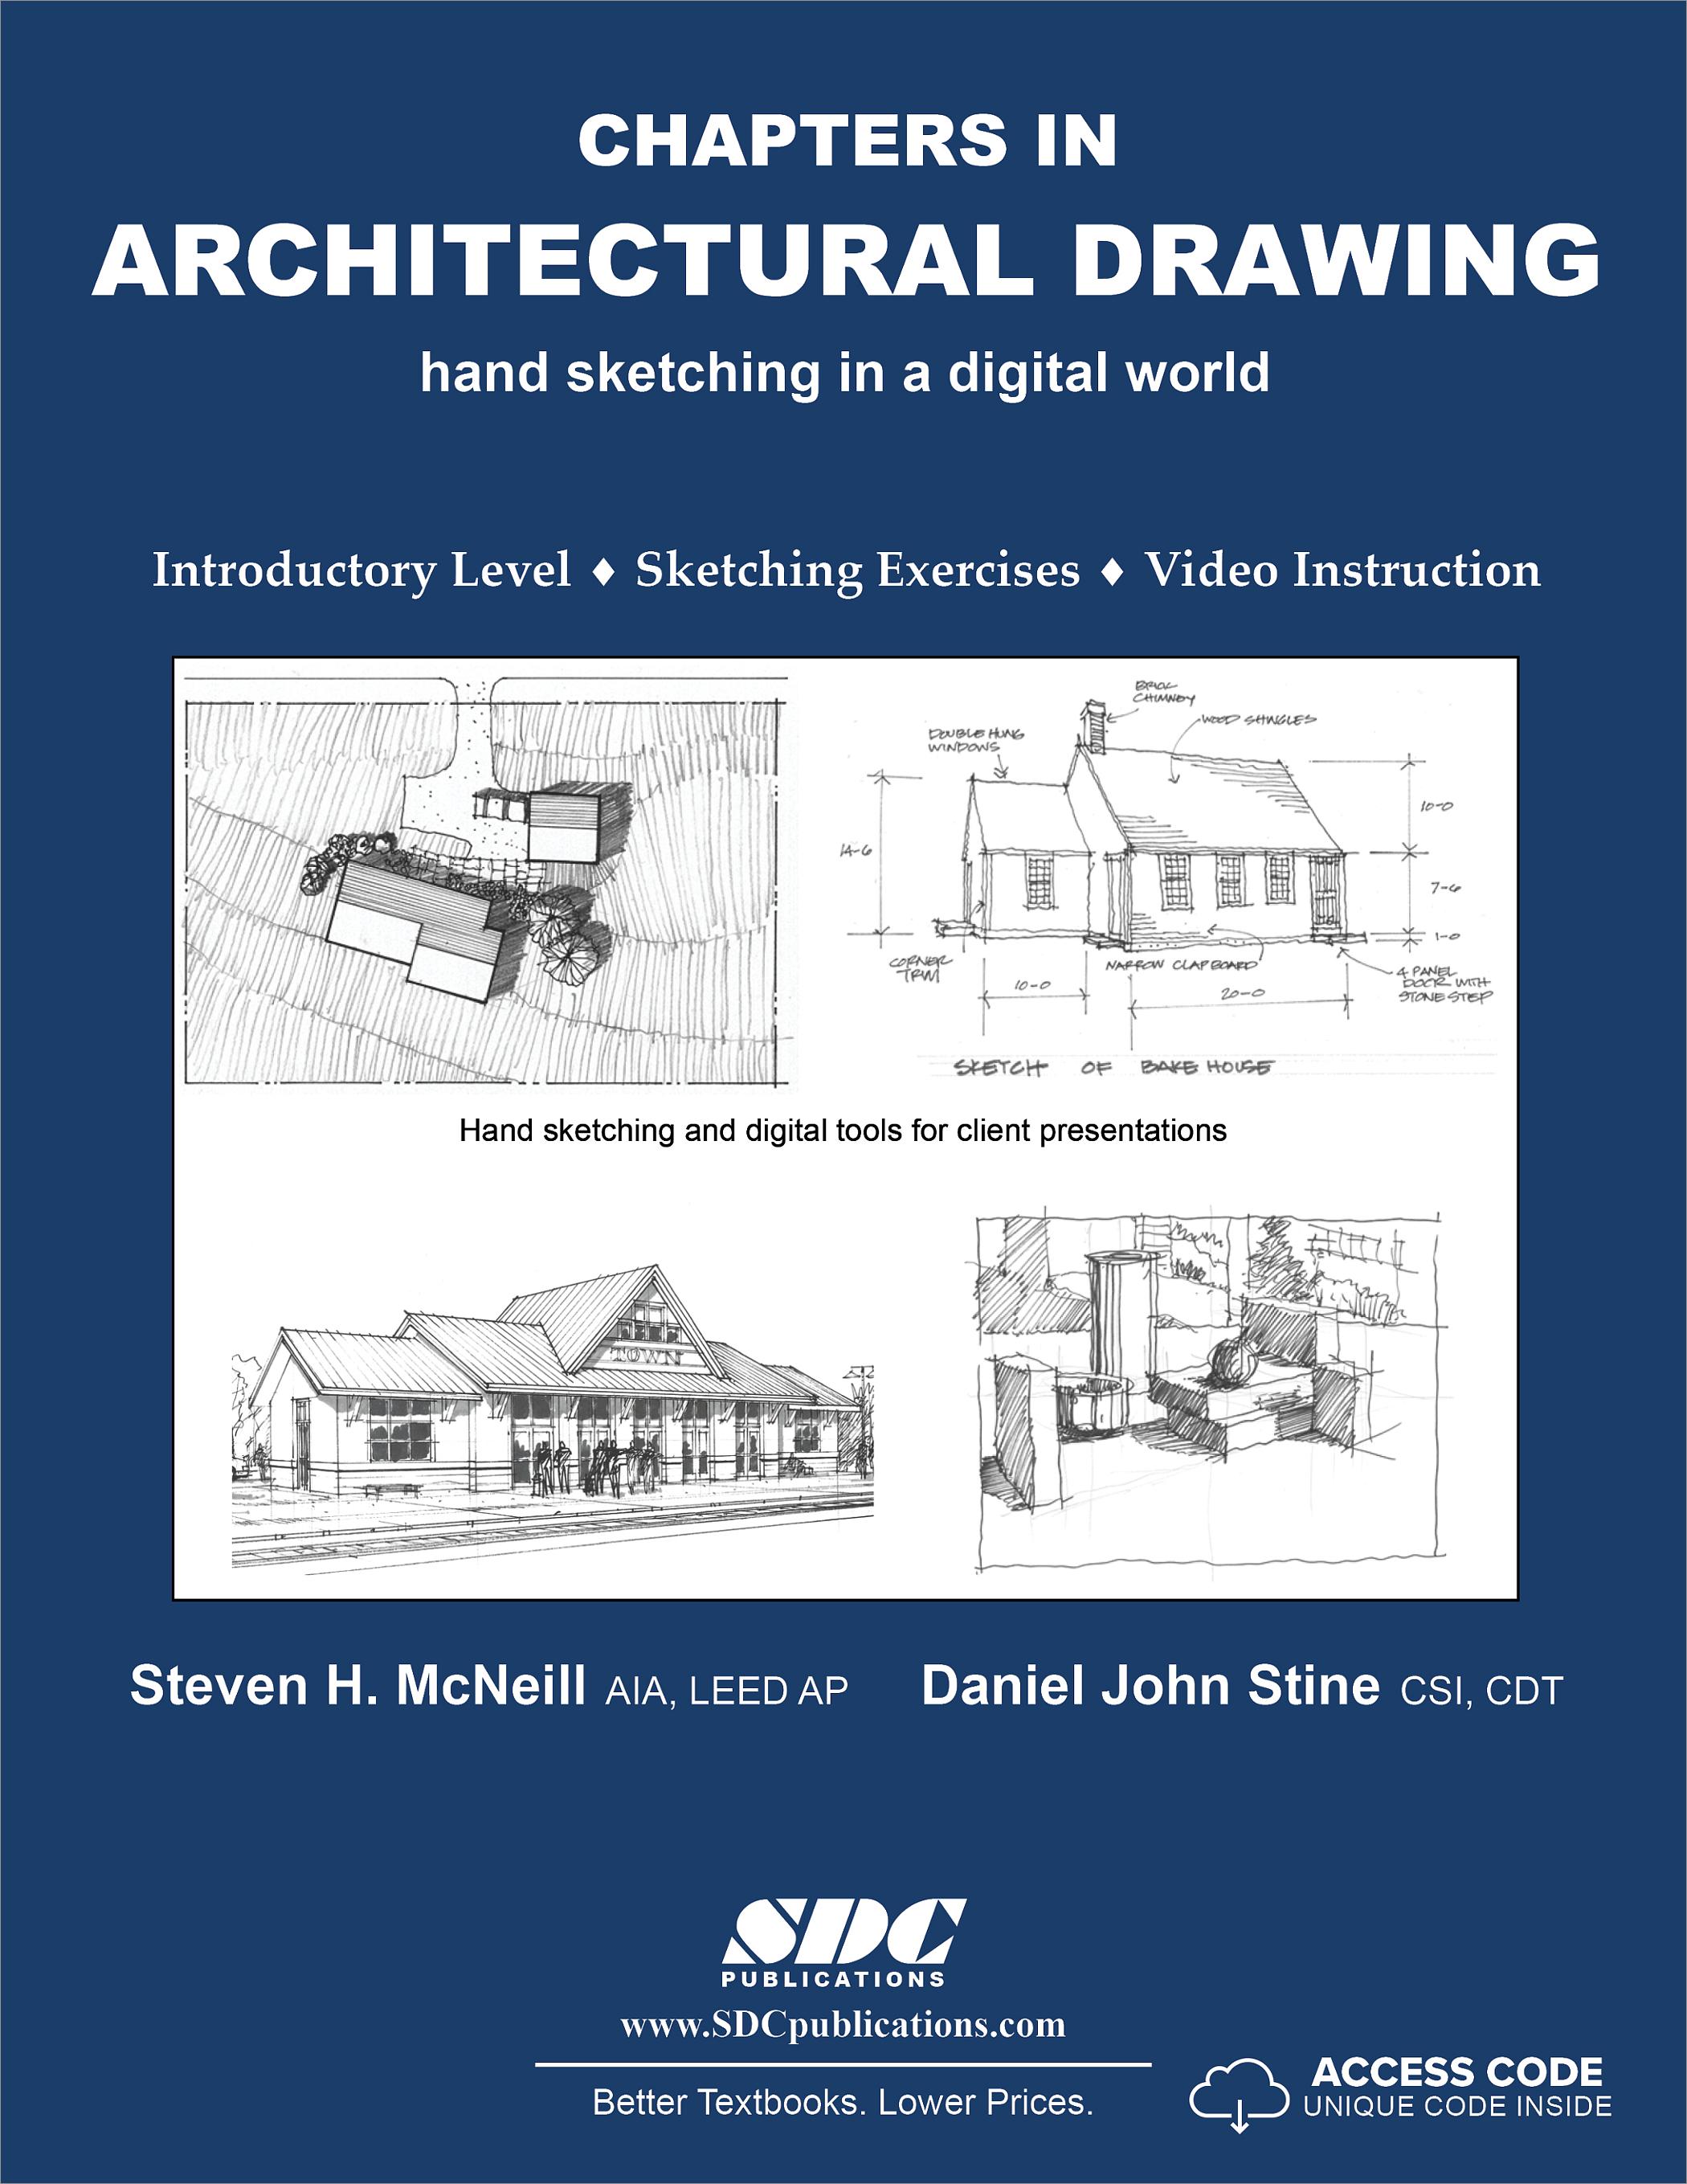 Best Books To Learn Architectural Drawing - www.inf-inet.com